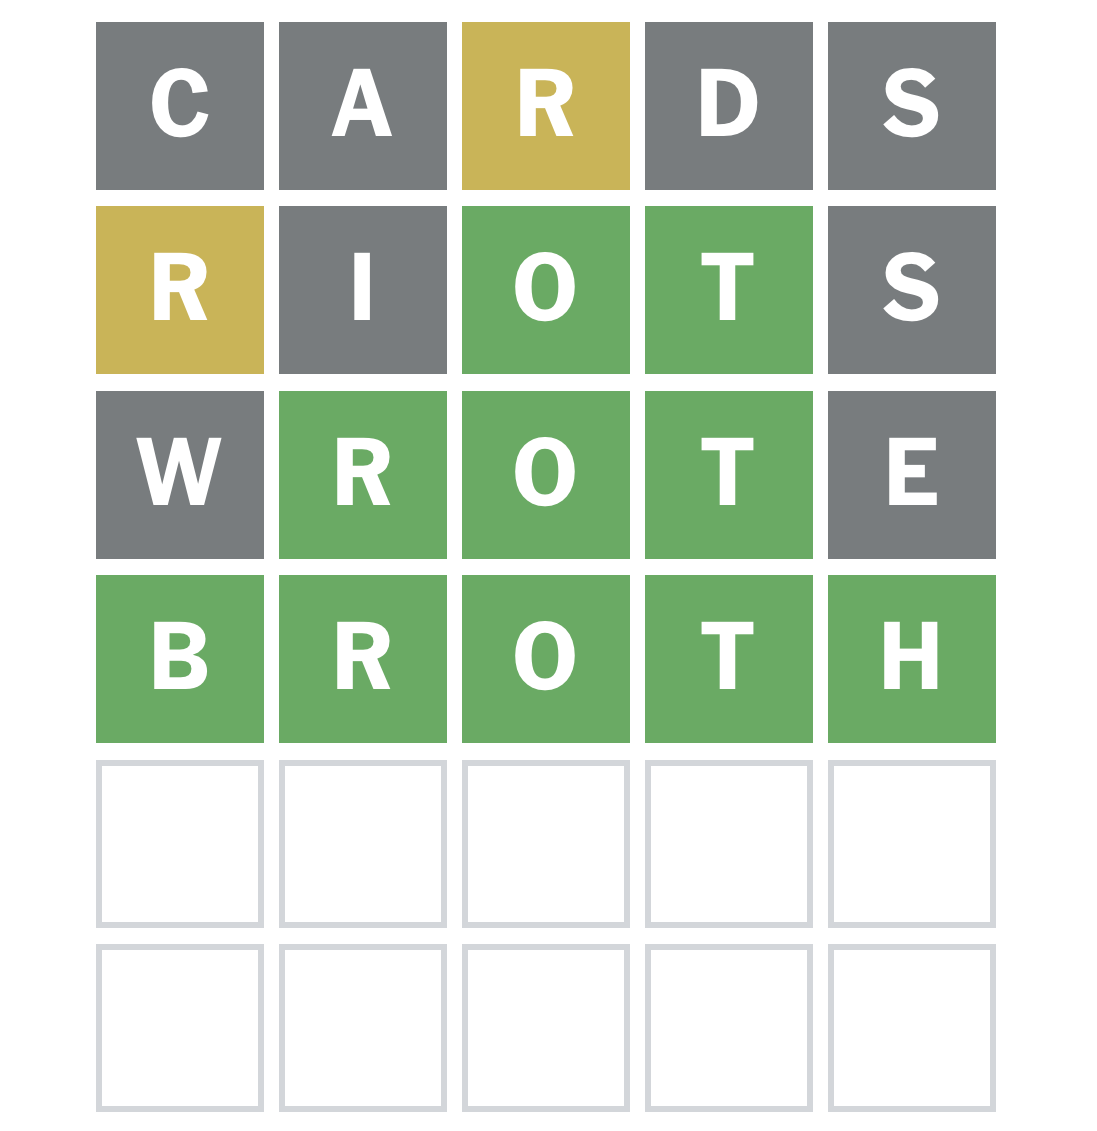 A wordl screenshot with the words: cards, riot, wrote, broth